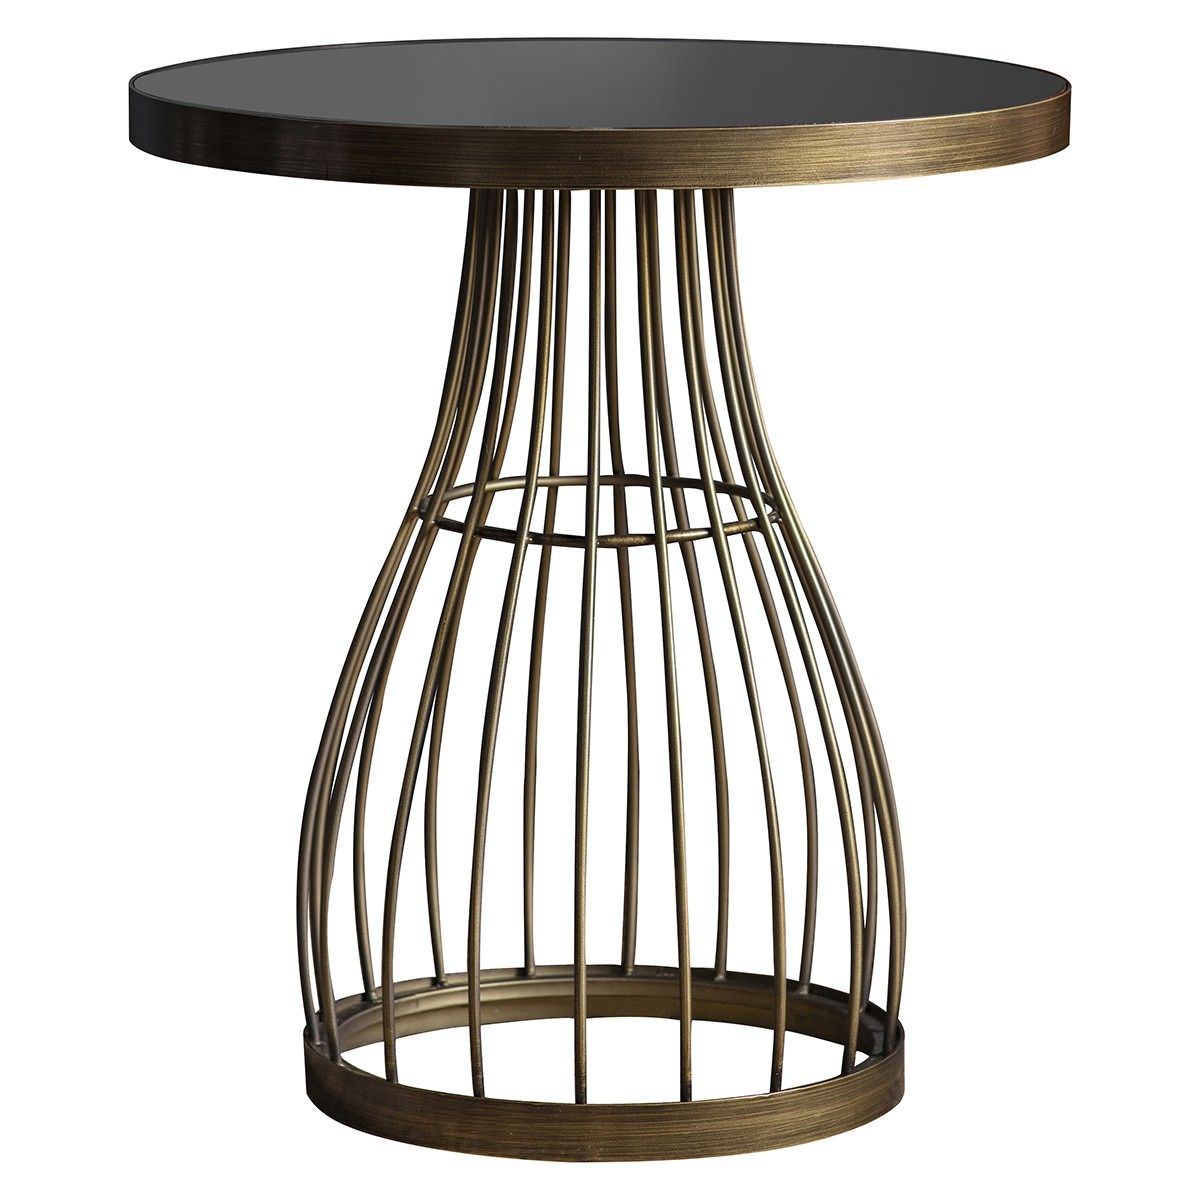 Paddy Metal Round Side Table, Black / Antique Brass In Antique Brass Round Console Tables (View 19 of 20)